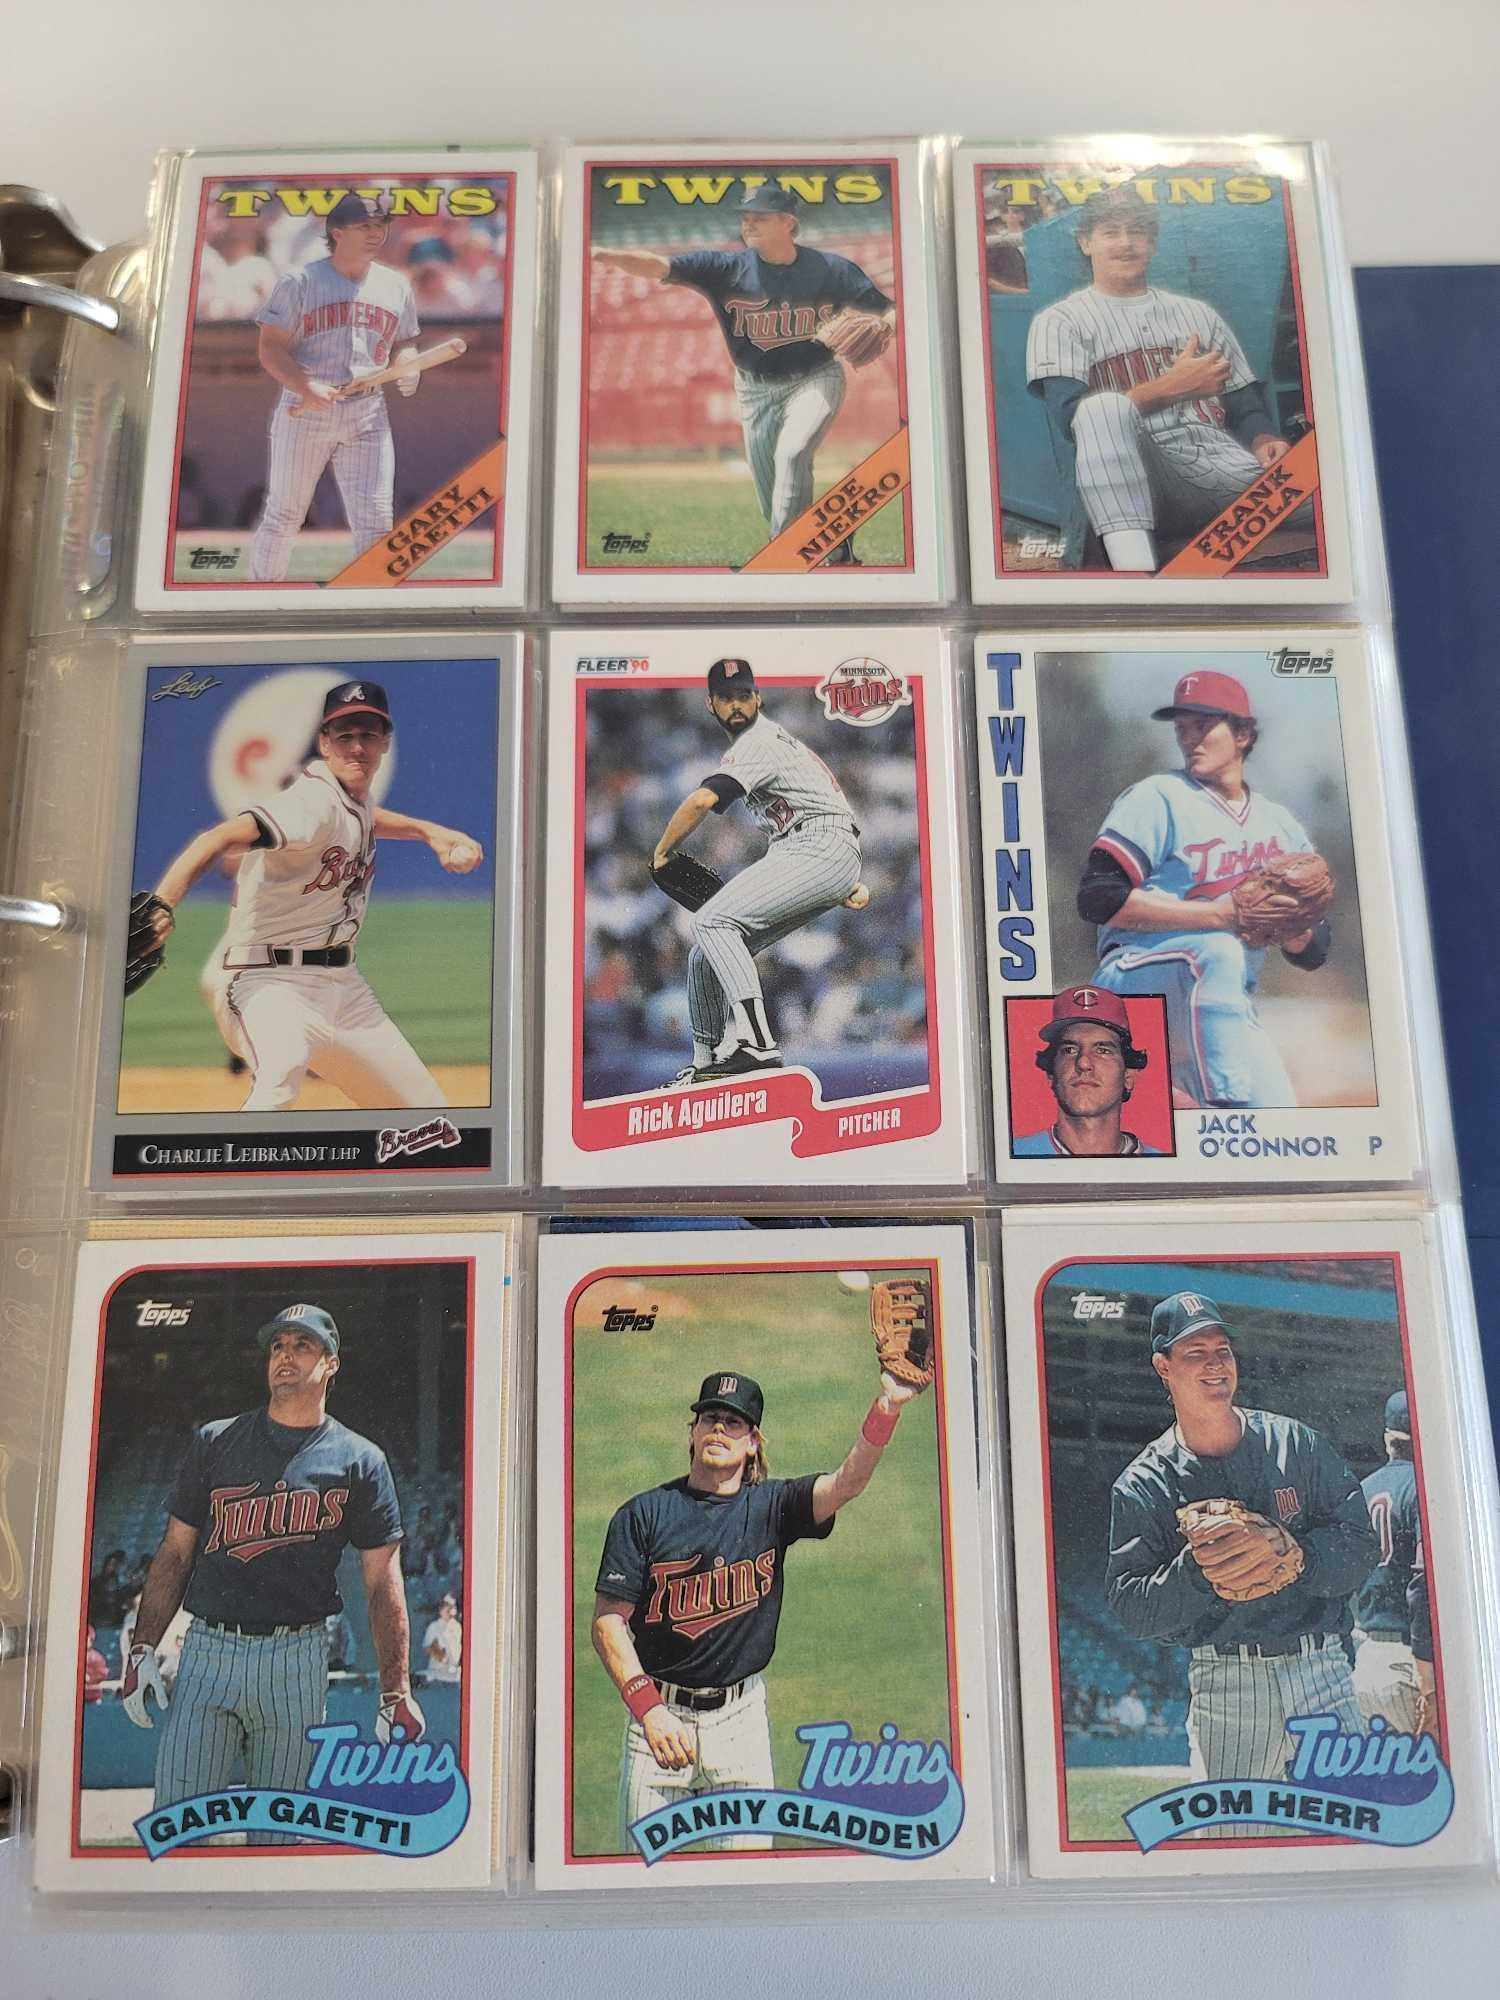 BLUE BINDER FULL OF ASSORTED MINNESOTA TWINS BASEBALL CARDS. ALL FROM THE 1980'S AND 1990'S. OVER 40